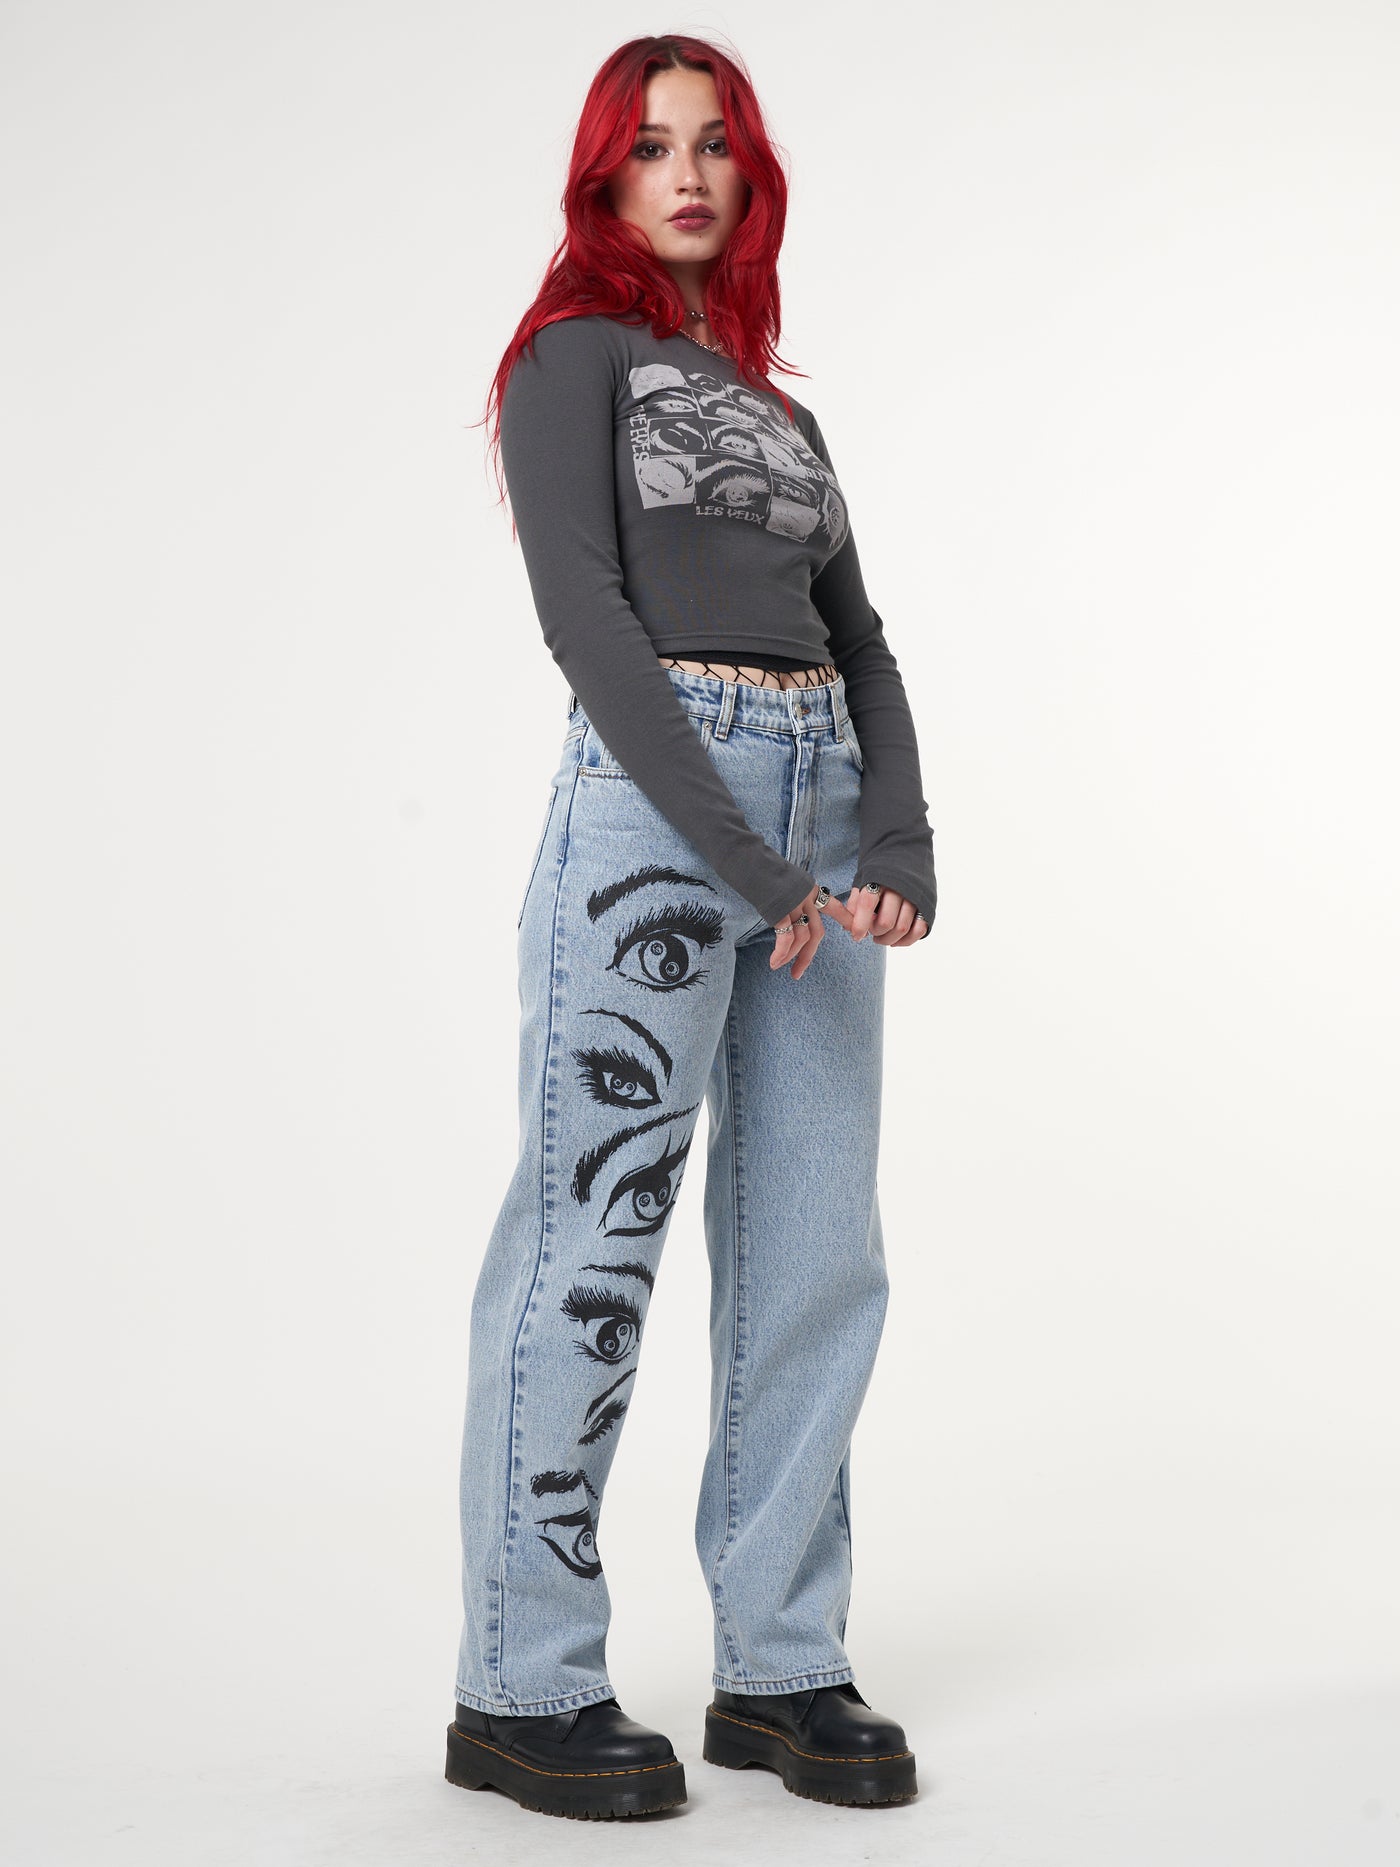 Long sleeve crop top in grey with Lex Yeux eyes graphic front print and thumbhole cuffs